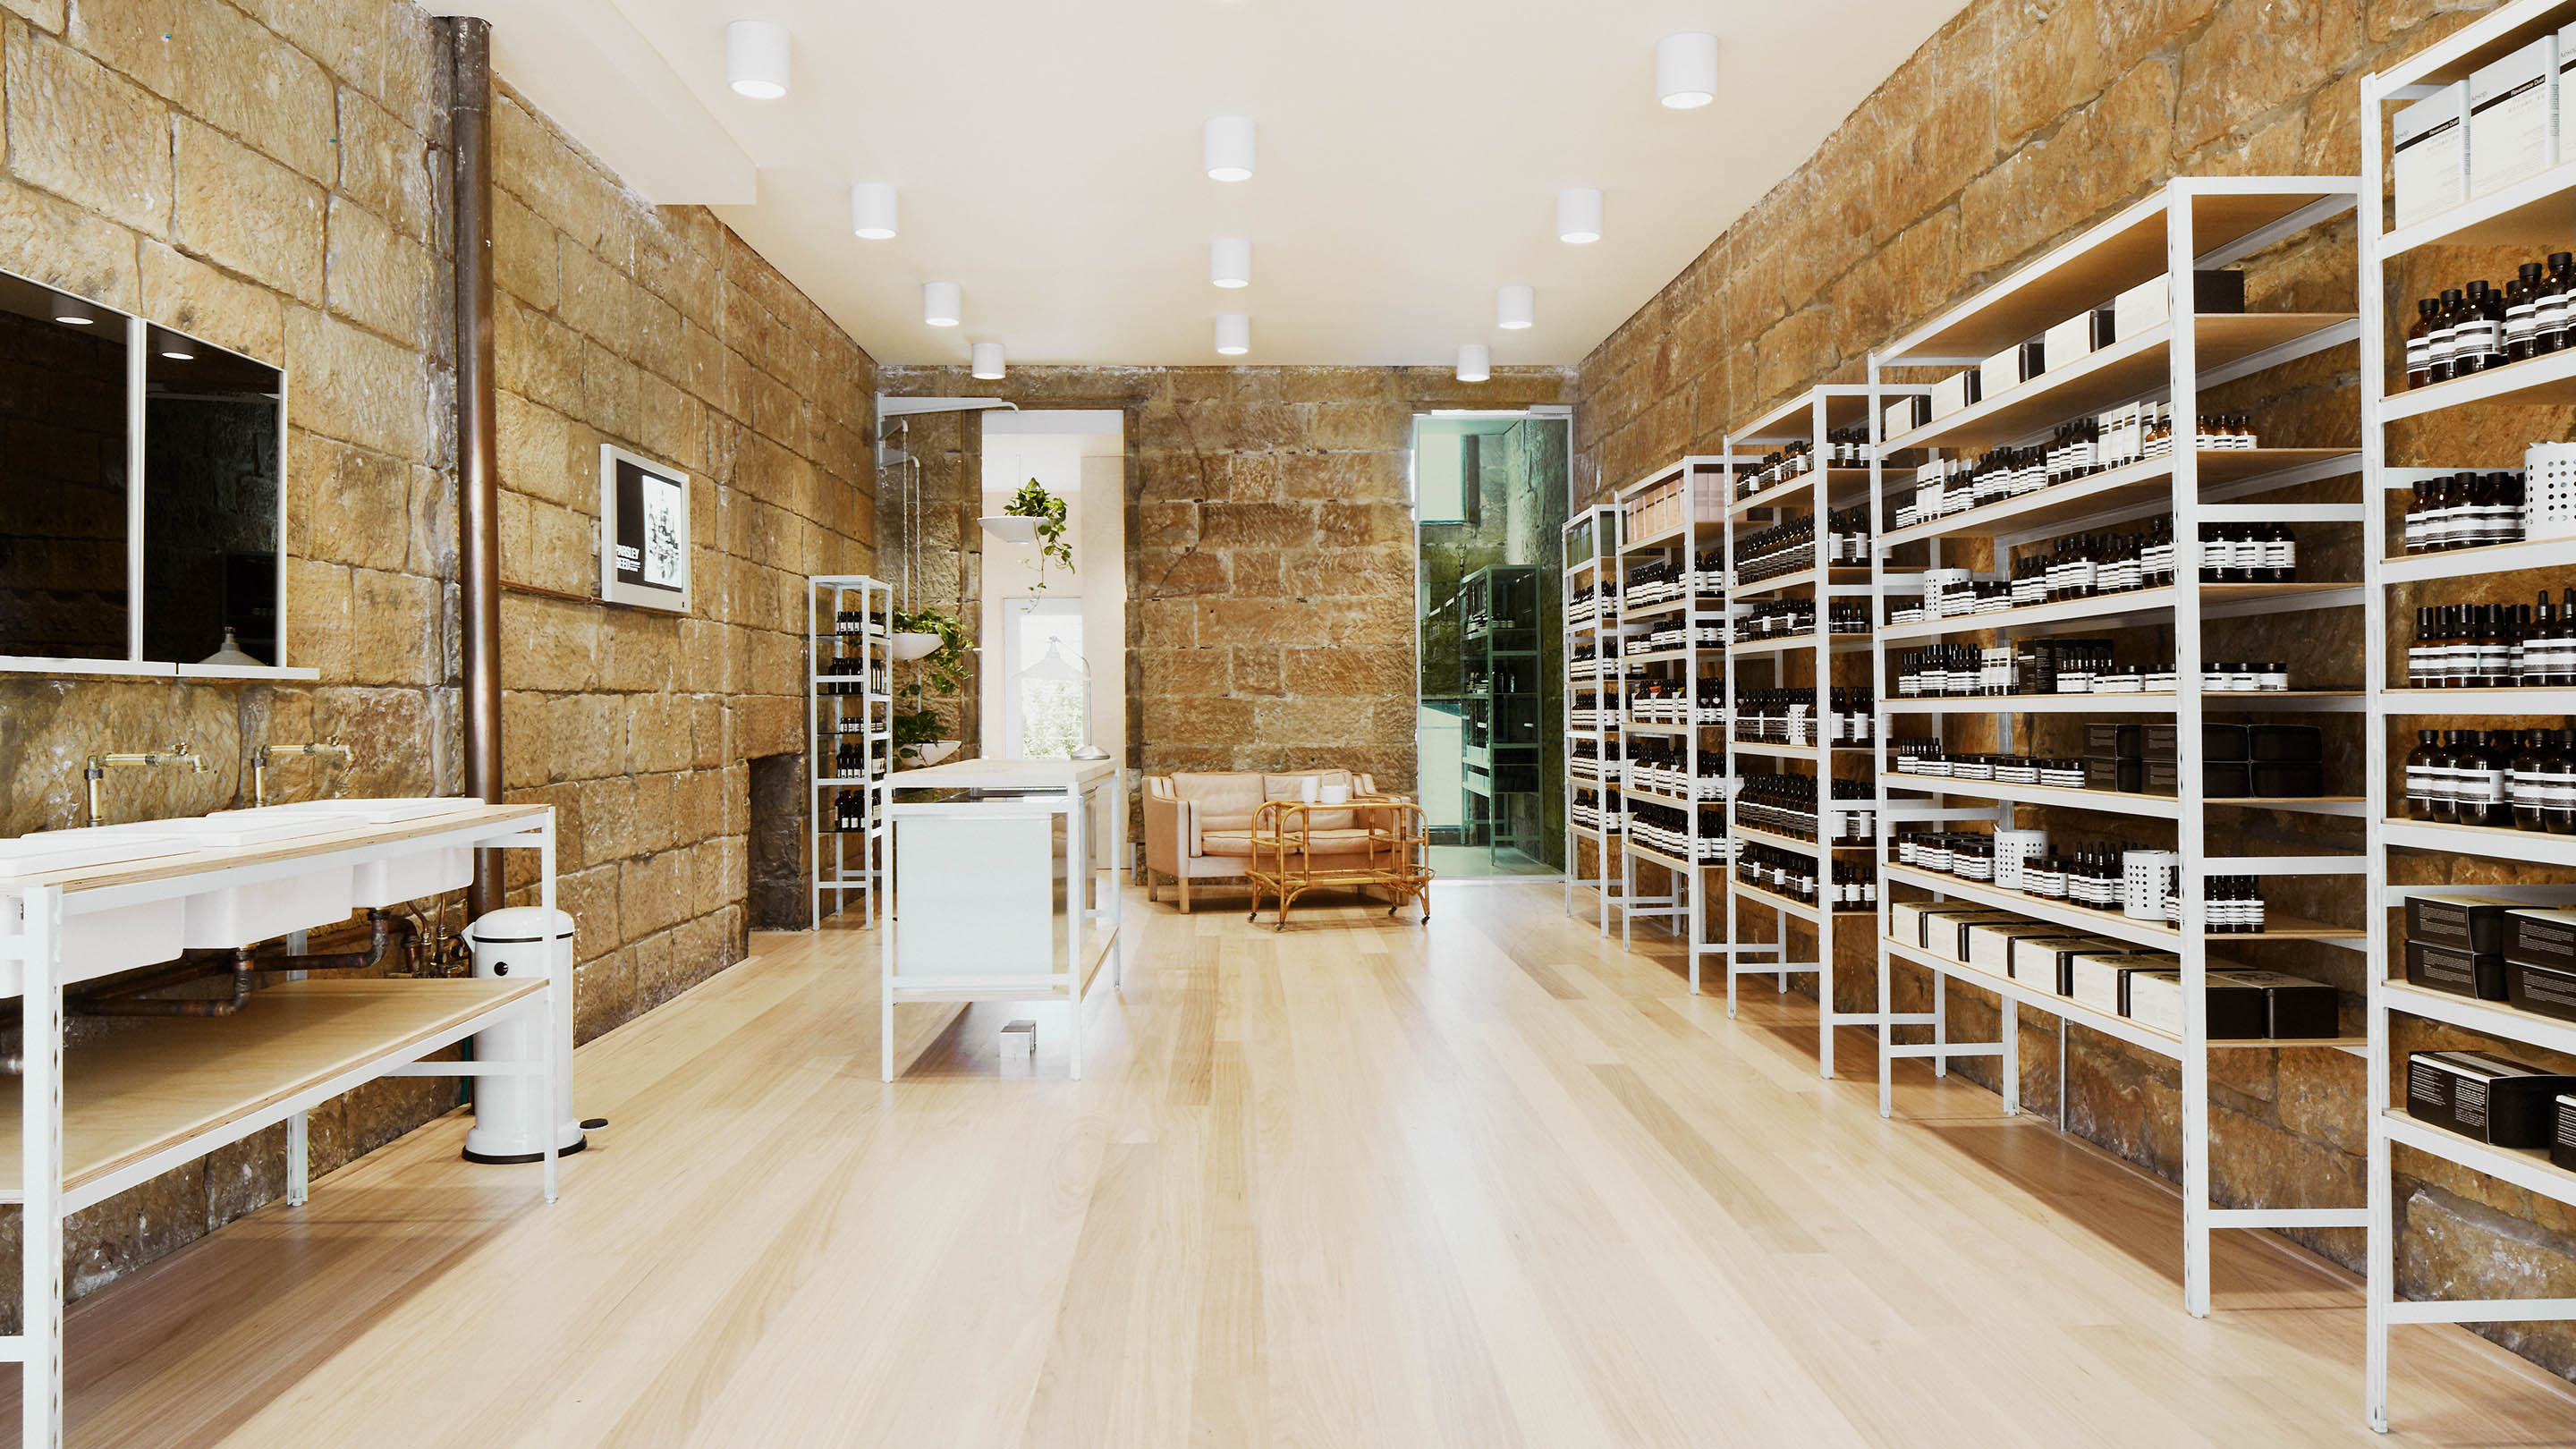 A long narrow store interior, white metal shelving lines the walls, that are constructed from large stone brick.